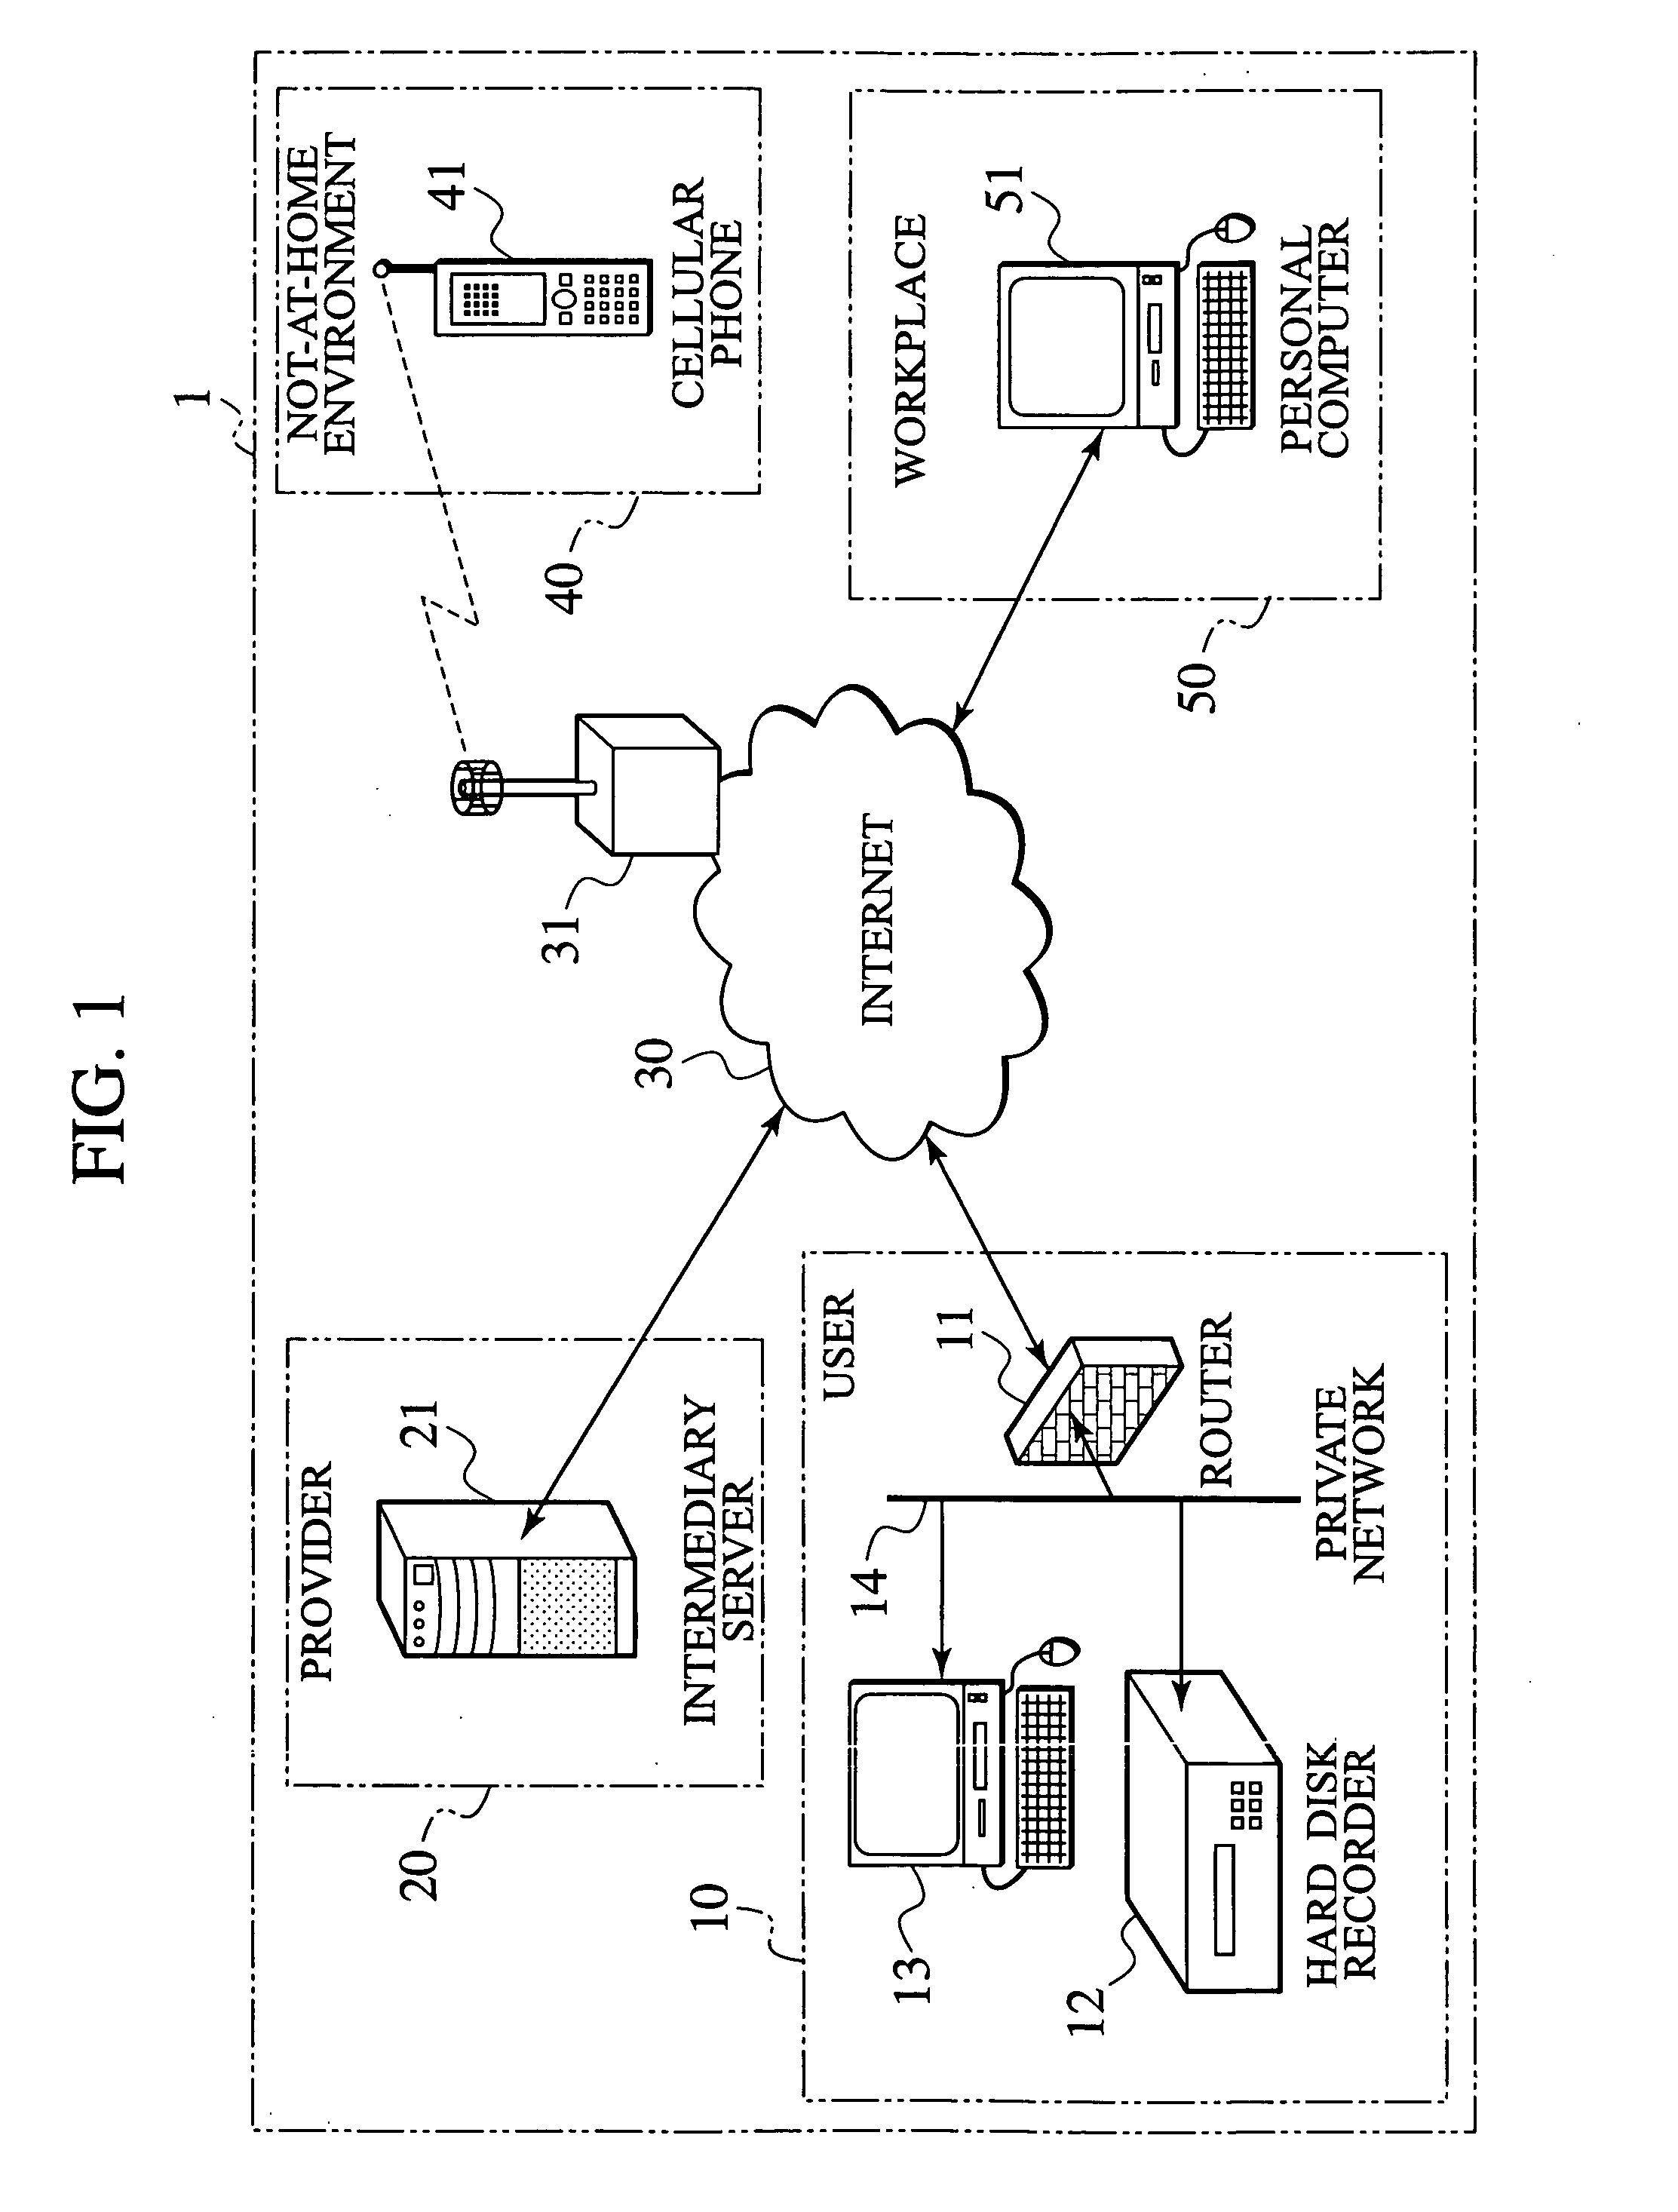 Control information transmission method, relay server, and controllable device